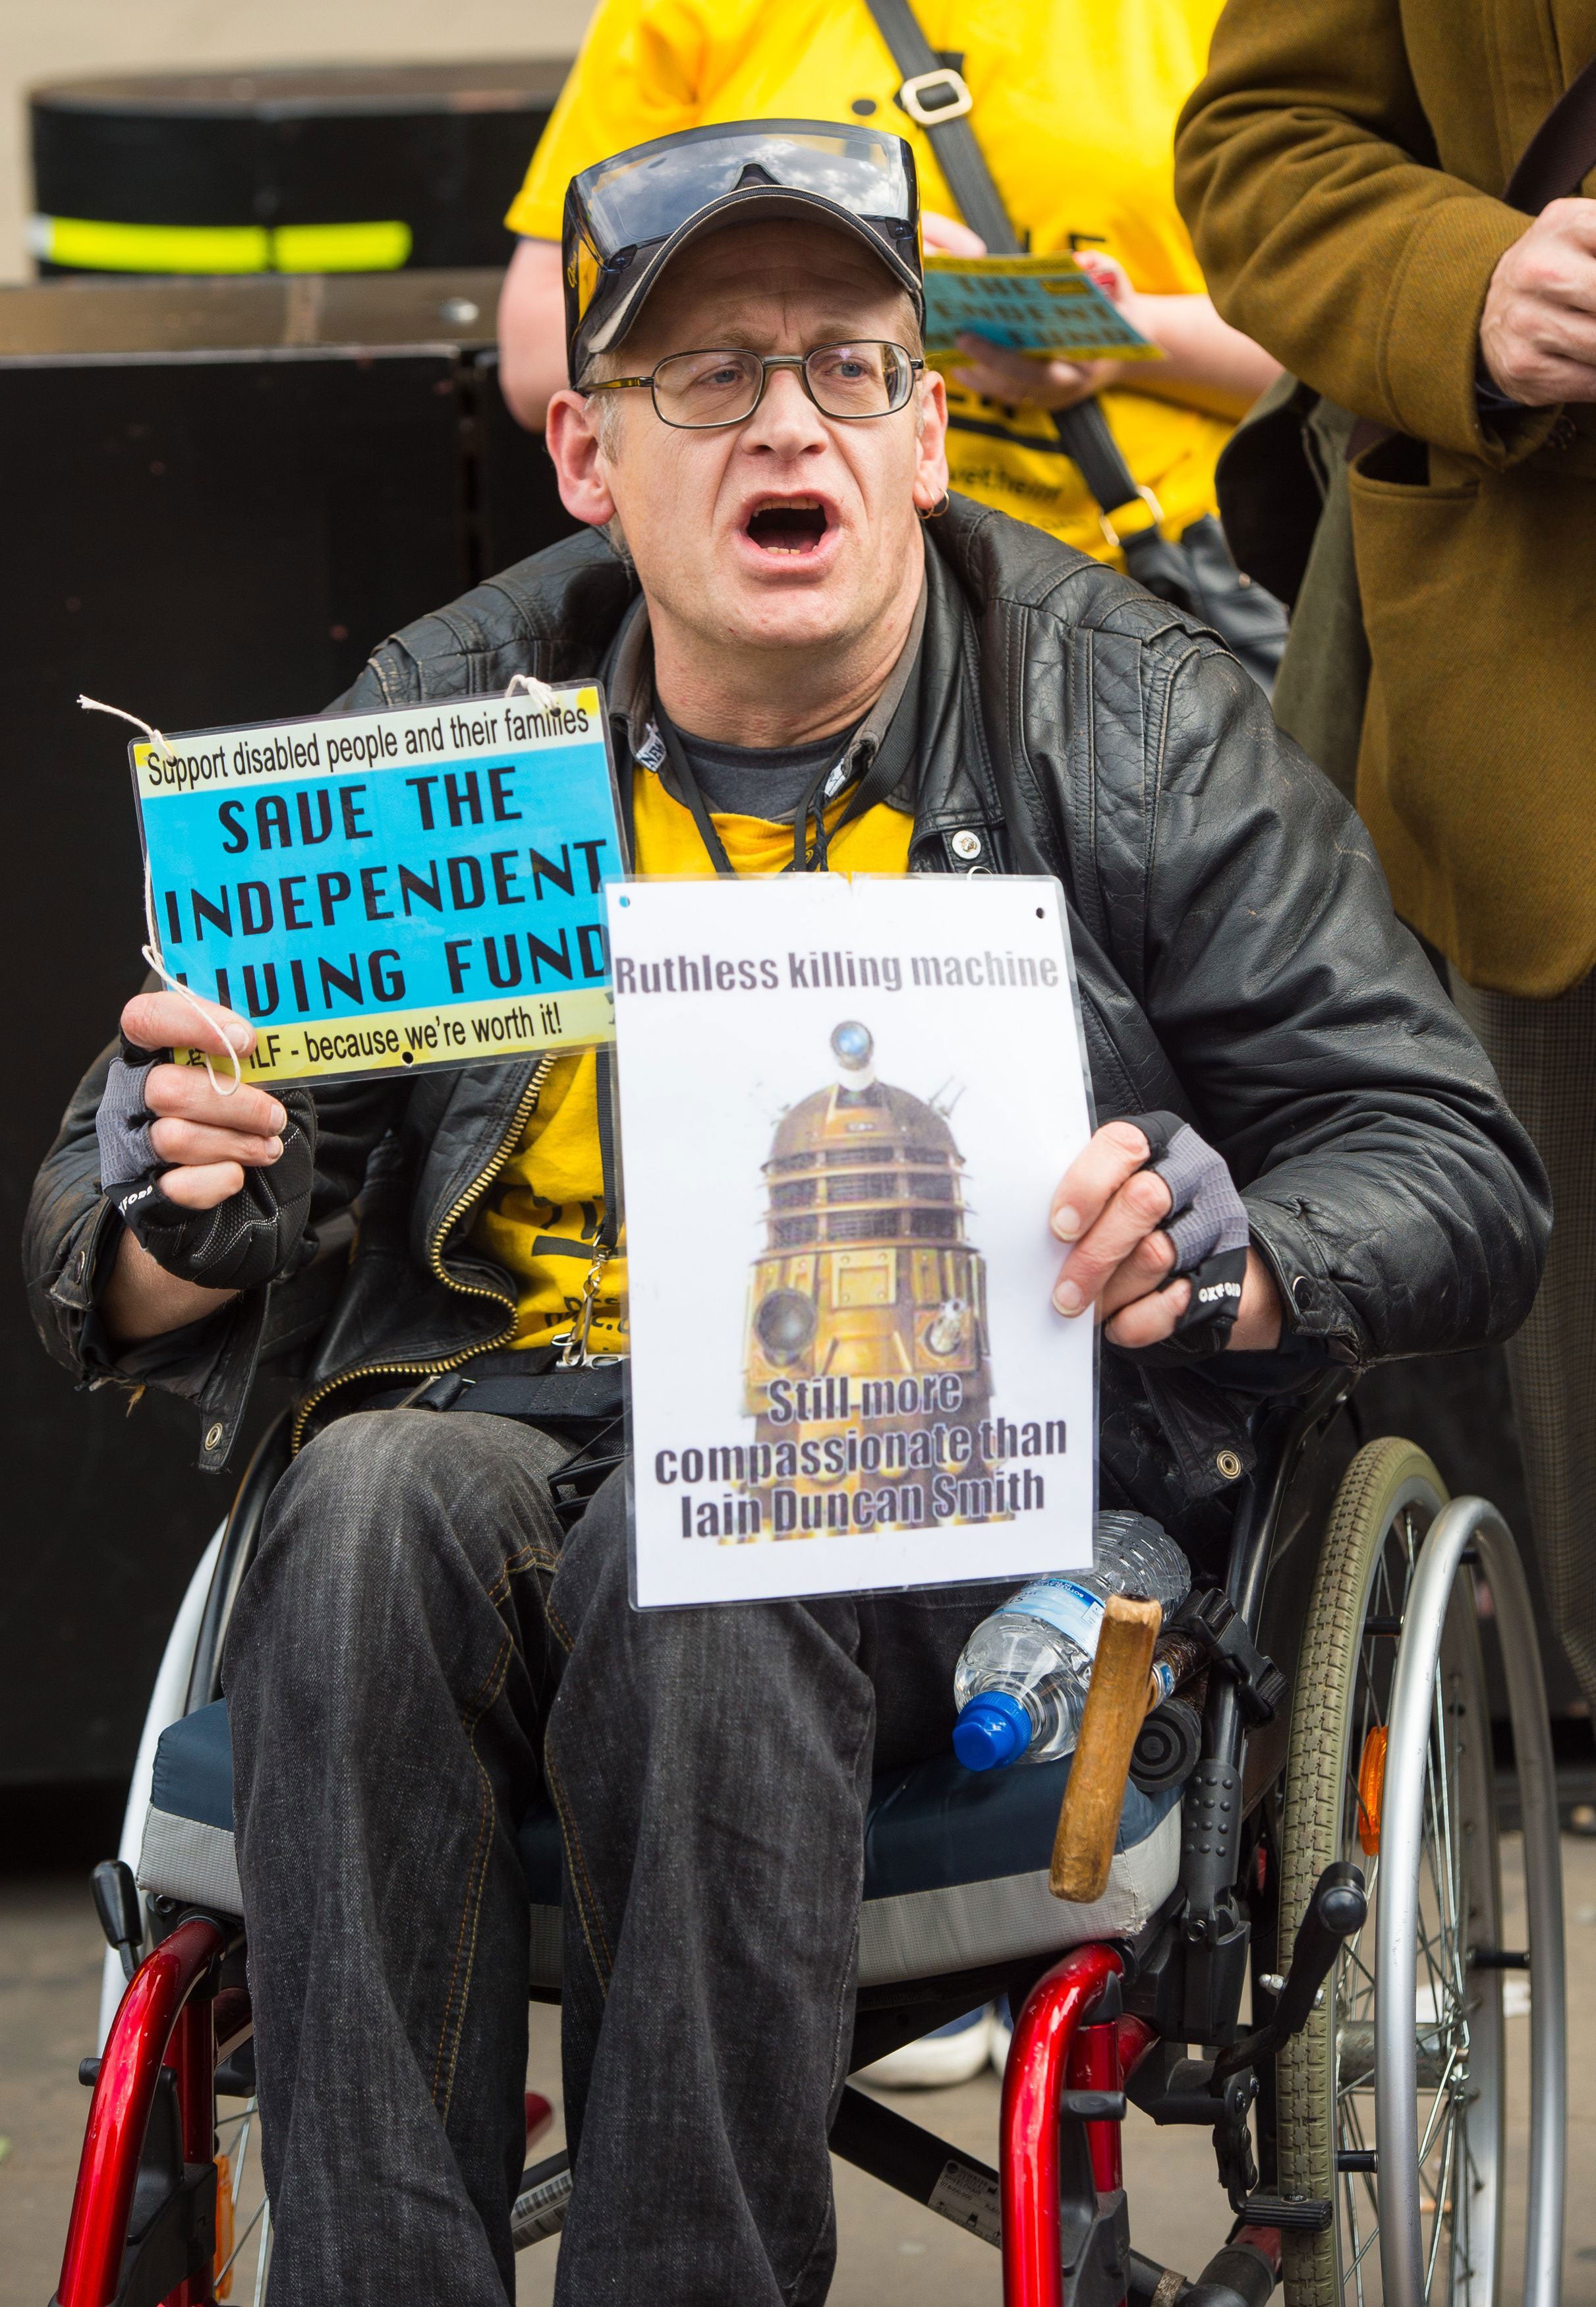 Protesters were from a group called Disabled People Against Cuts